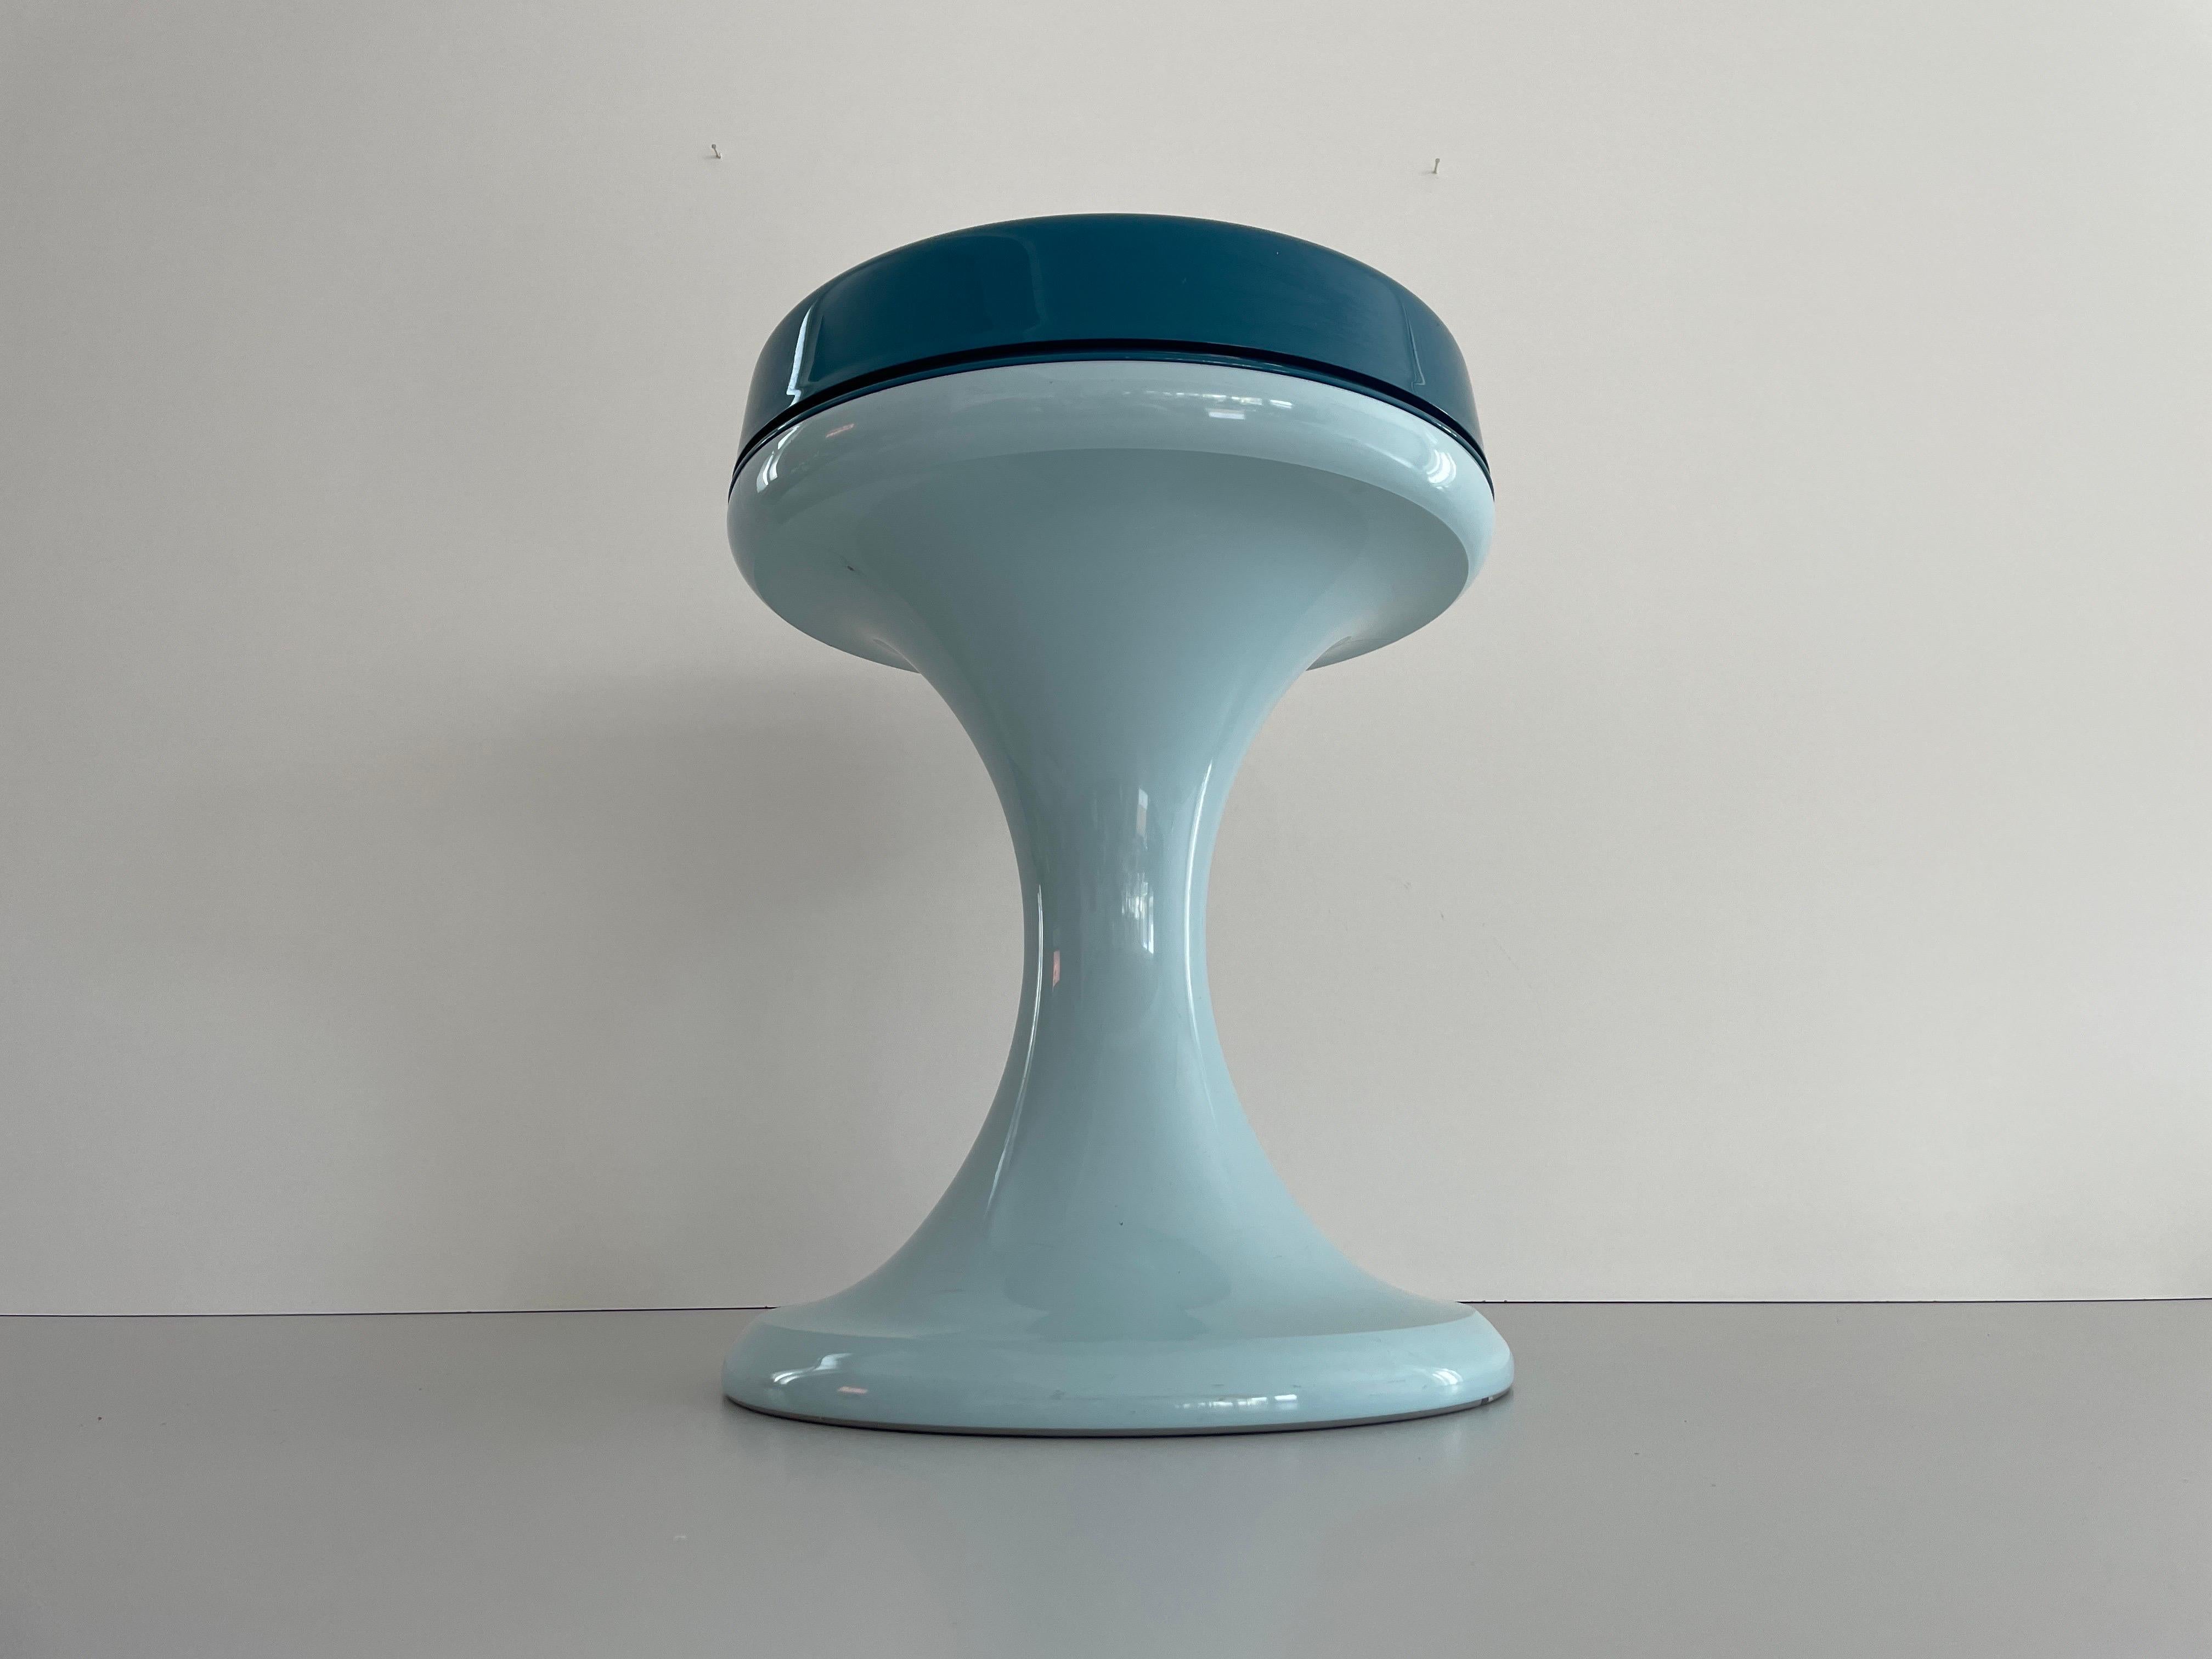 Space Age Plexiglass Stool by EMSA, 1970s, Germany

Measurtements :

Height: 45 cm
Top diameter: 33 cm

Please do not hesitate to ask us if you have any questions.